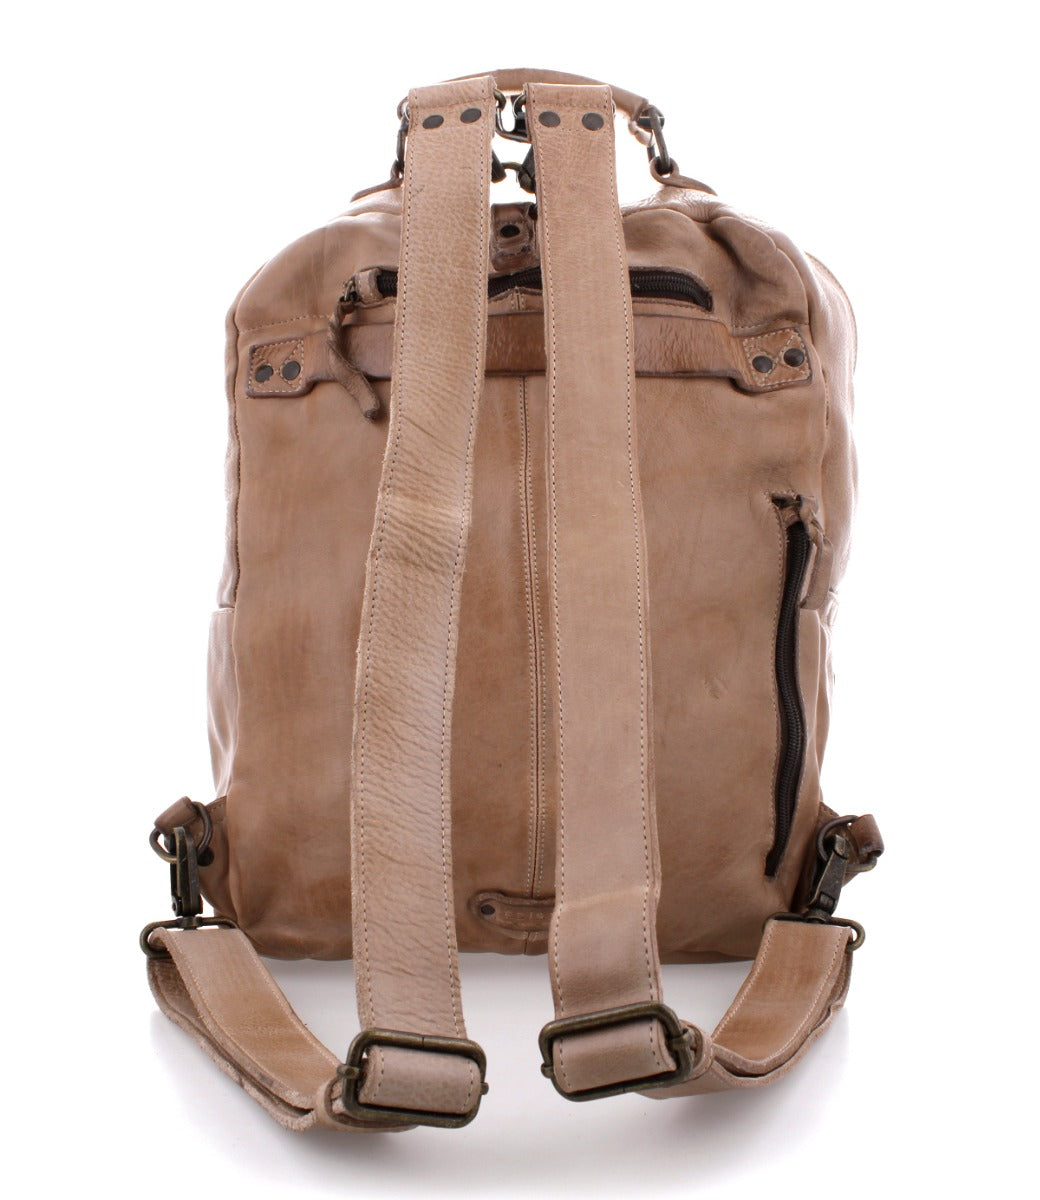 A Lafe leather backpack with straps and buckles. (Brand name: Bed Stu)